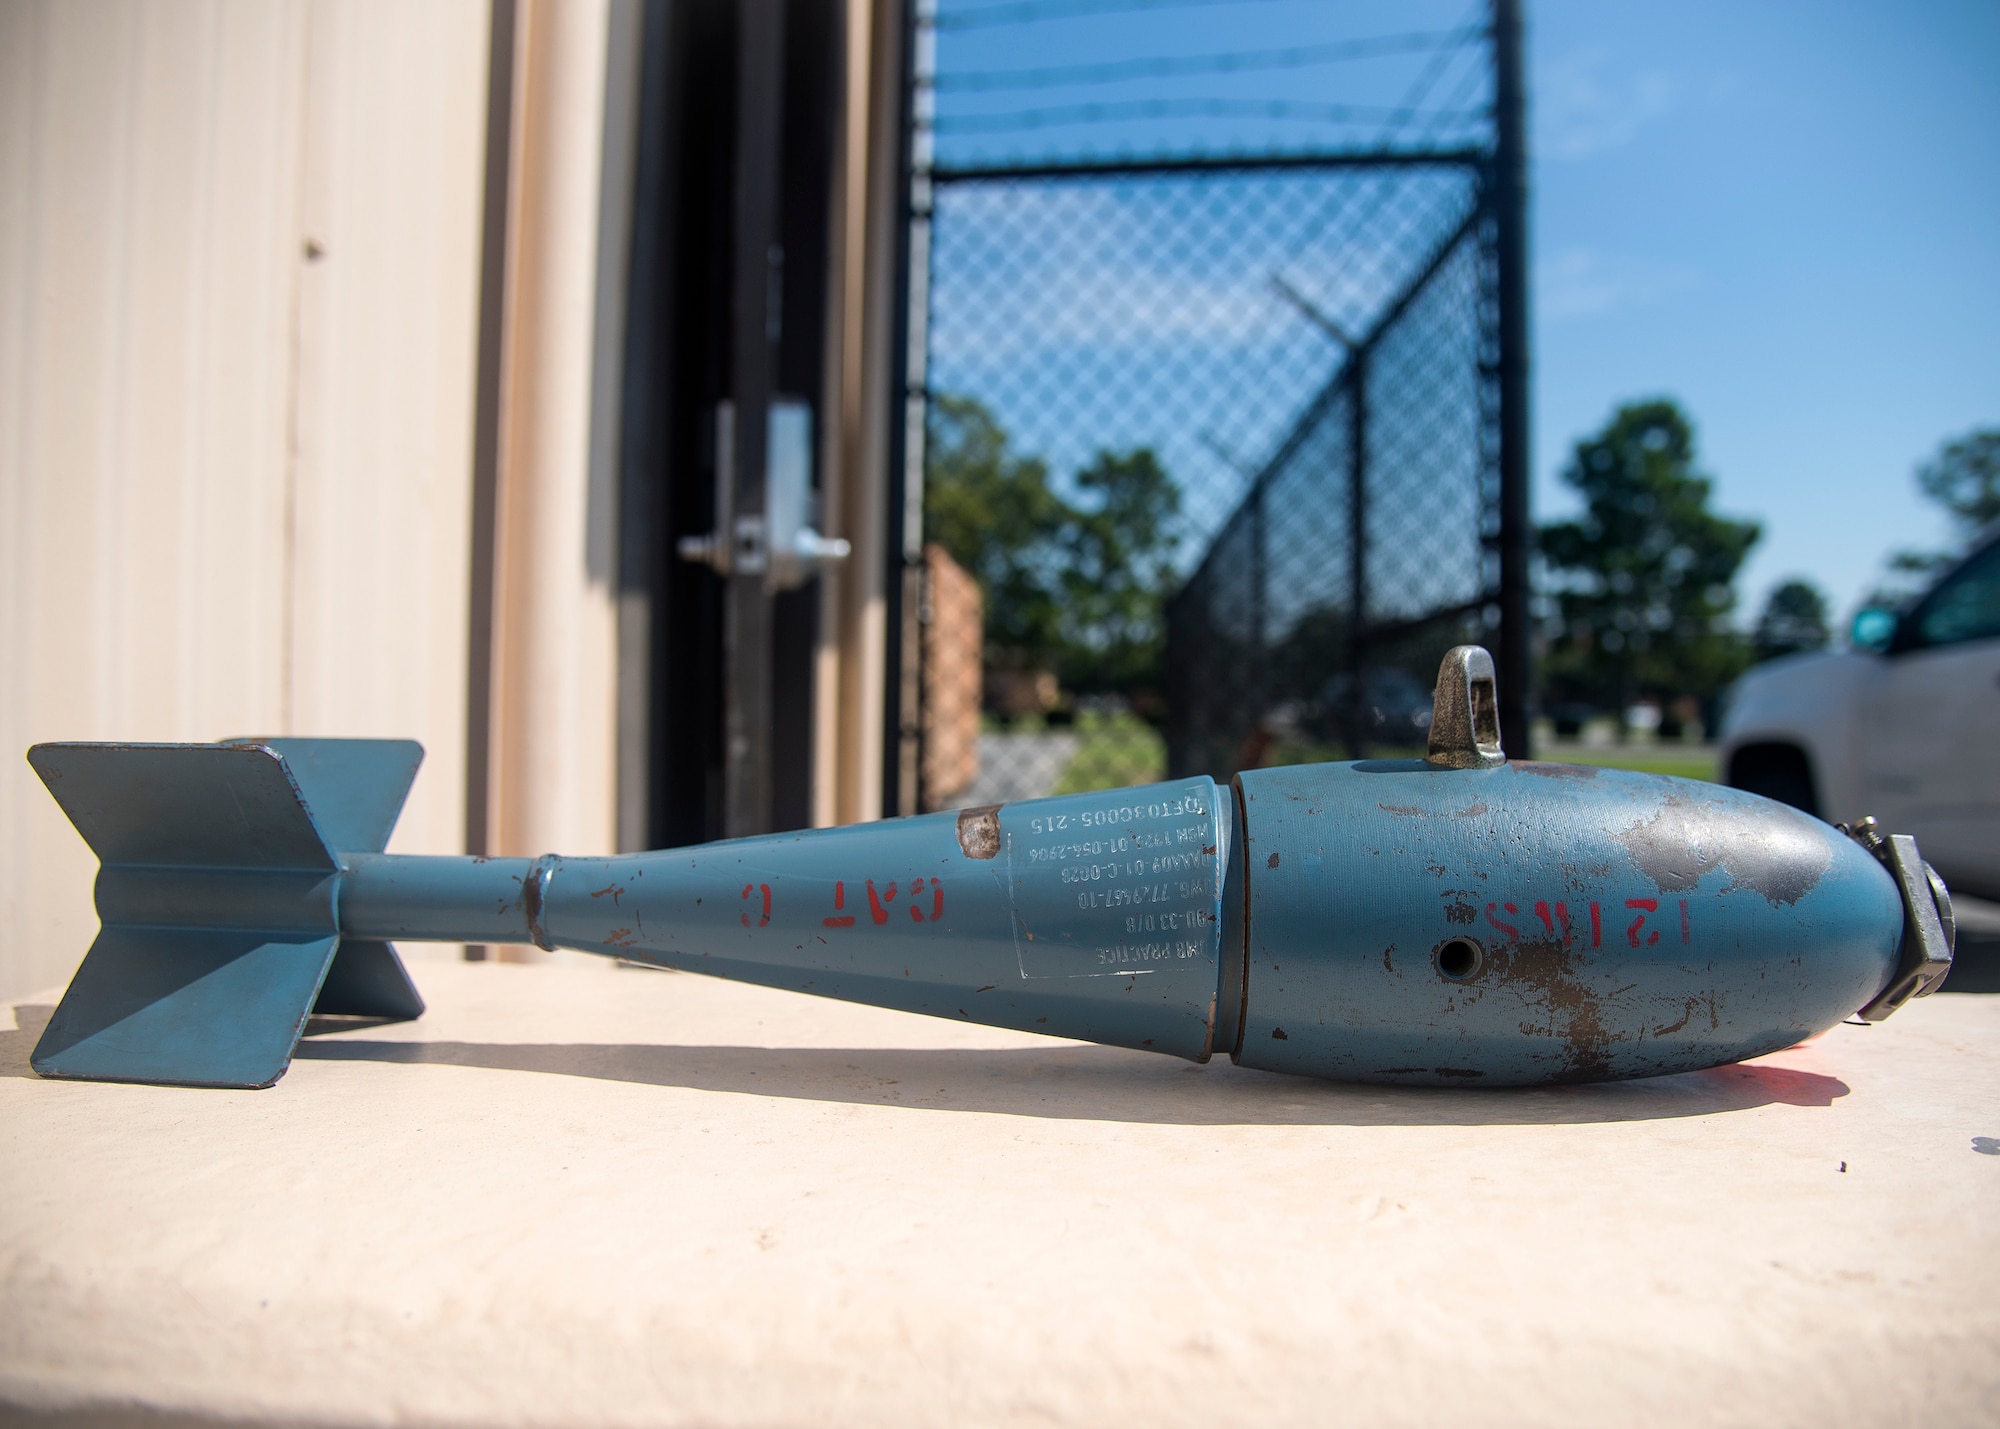 The BDU-33 is a 25-pound training munition used to simulate the M1a-82 500-pound bomb. It is approximately 22 and a half inches long and is blue in color. Although the training munition is inert, it is equipped with a small pyrotechnic charge and should not be handled. (U.S. Air Force photo by Airman 1st Class Eugene Oliver)